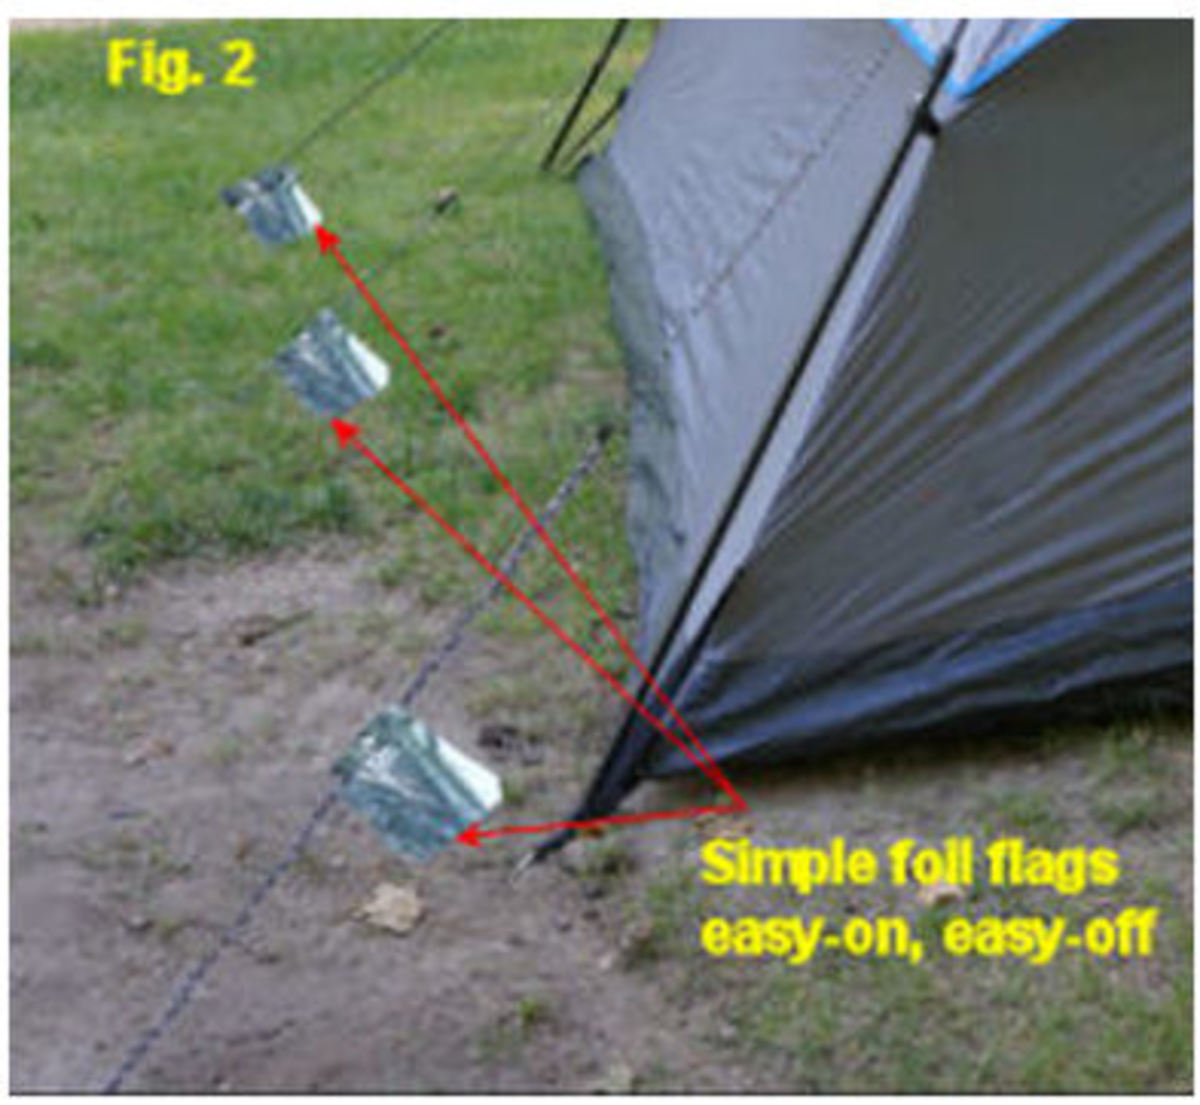 Foil flags on camping tent guy lines